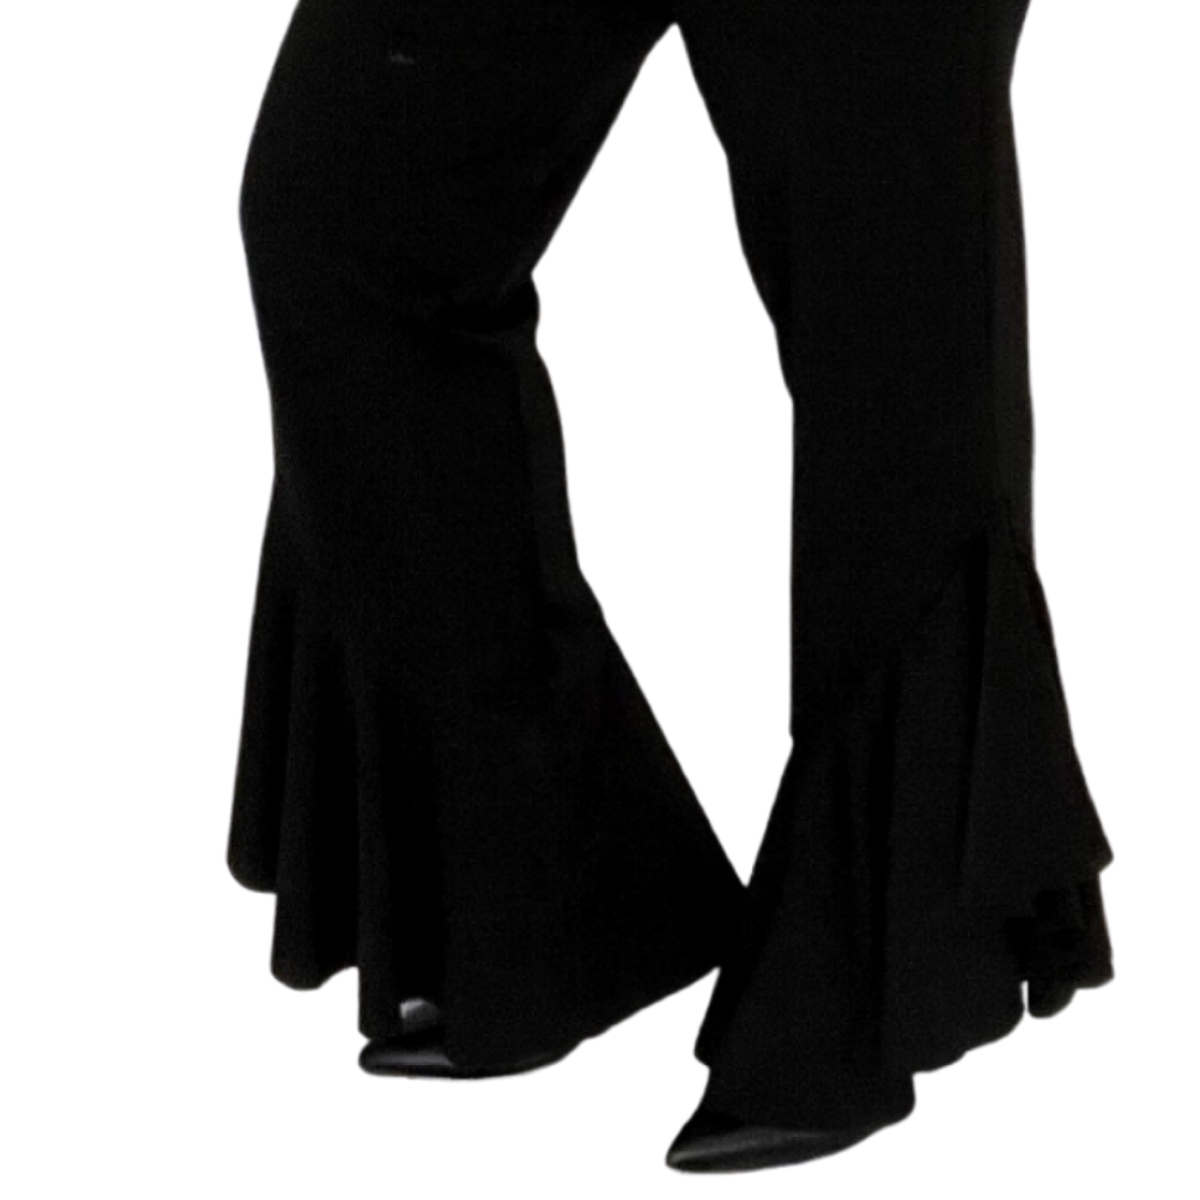 ROCKTHOSECURVES BLACK FITTED HIGH WAIST TROUSERS WITH FRILLED HEM